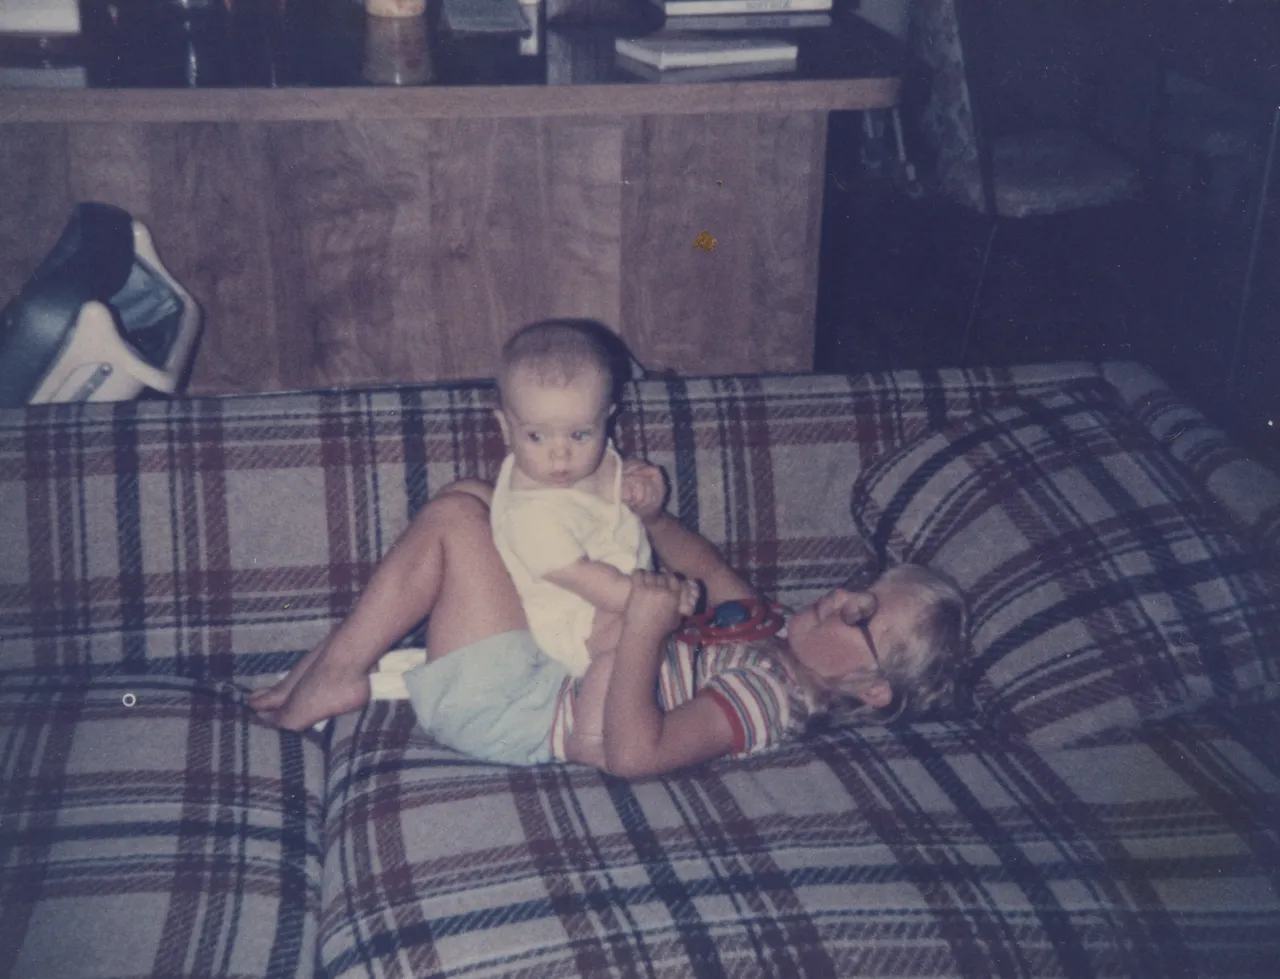 1985 Joey Arnold & Katie 06 Playing But Looking Hey Whats That Over There on Couch.png